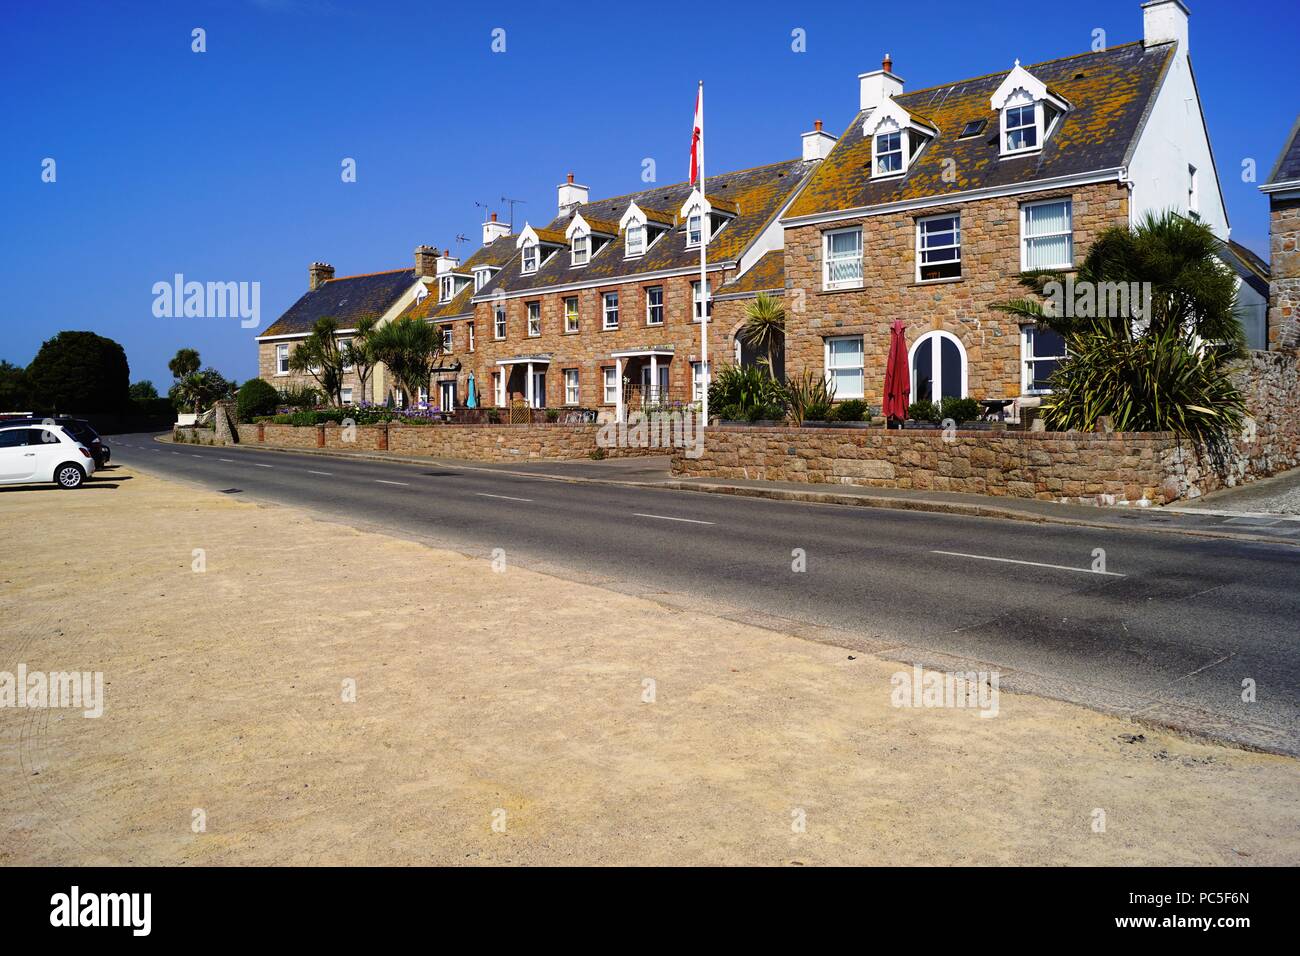 St clement jersey hi-res stock photography and images - Alamy